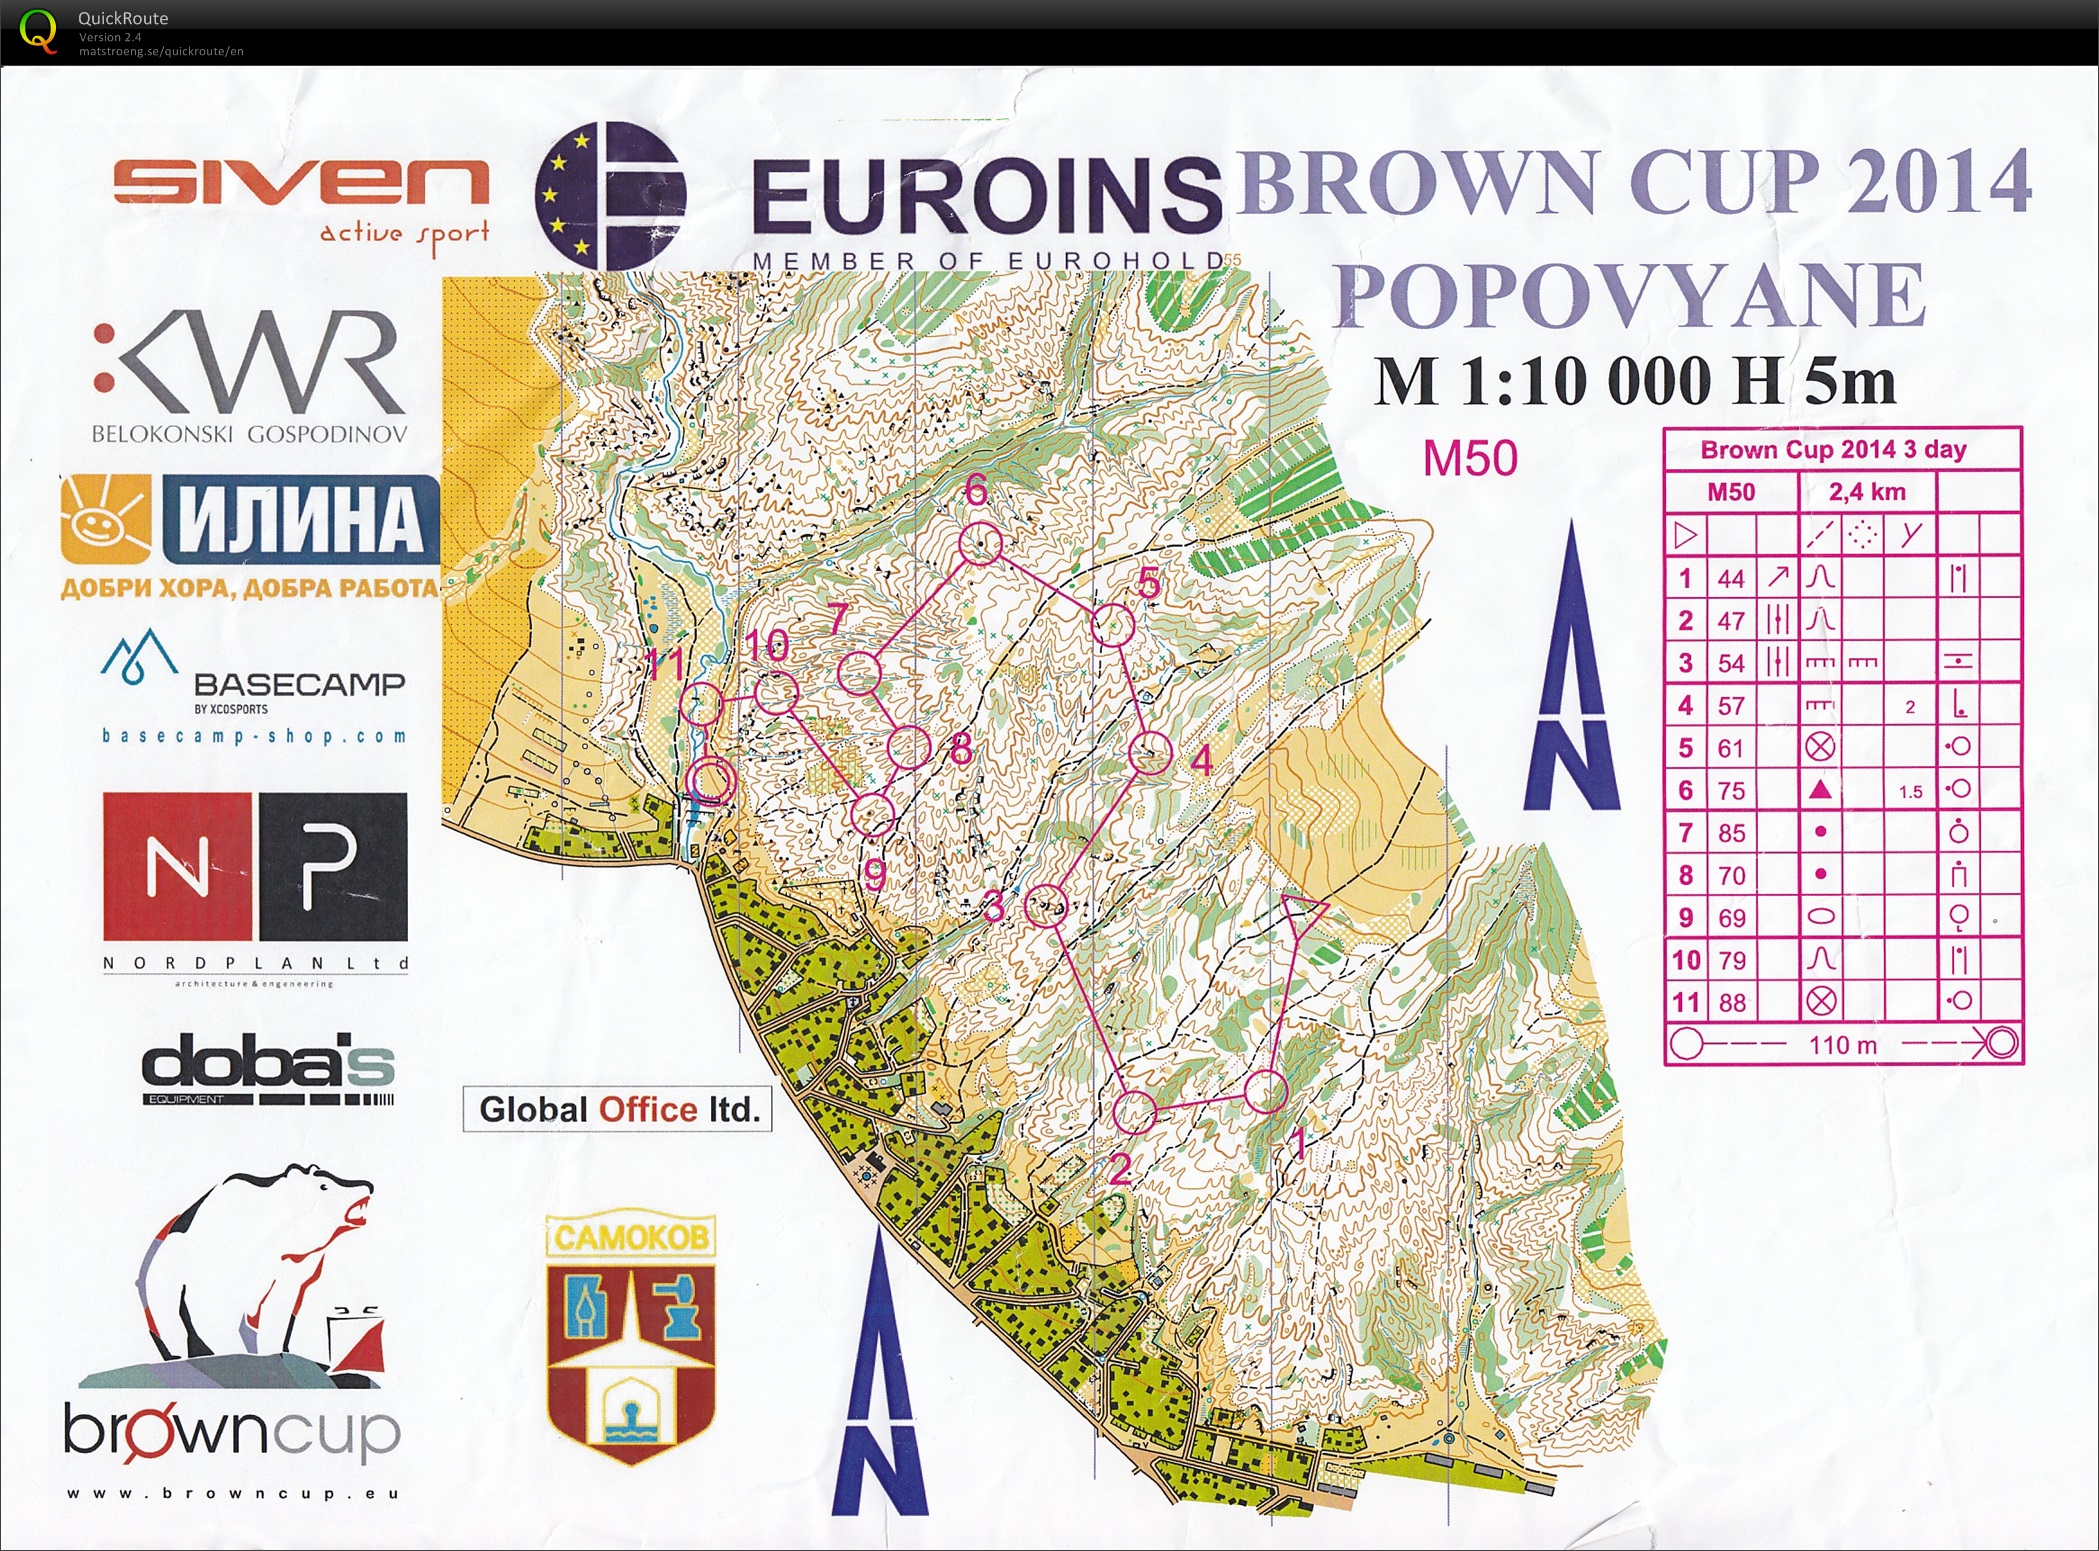 Brown-Cup 2014 E3 (2014-05-05)